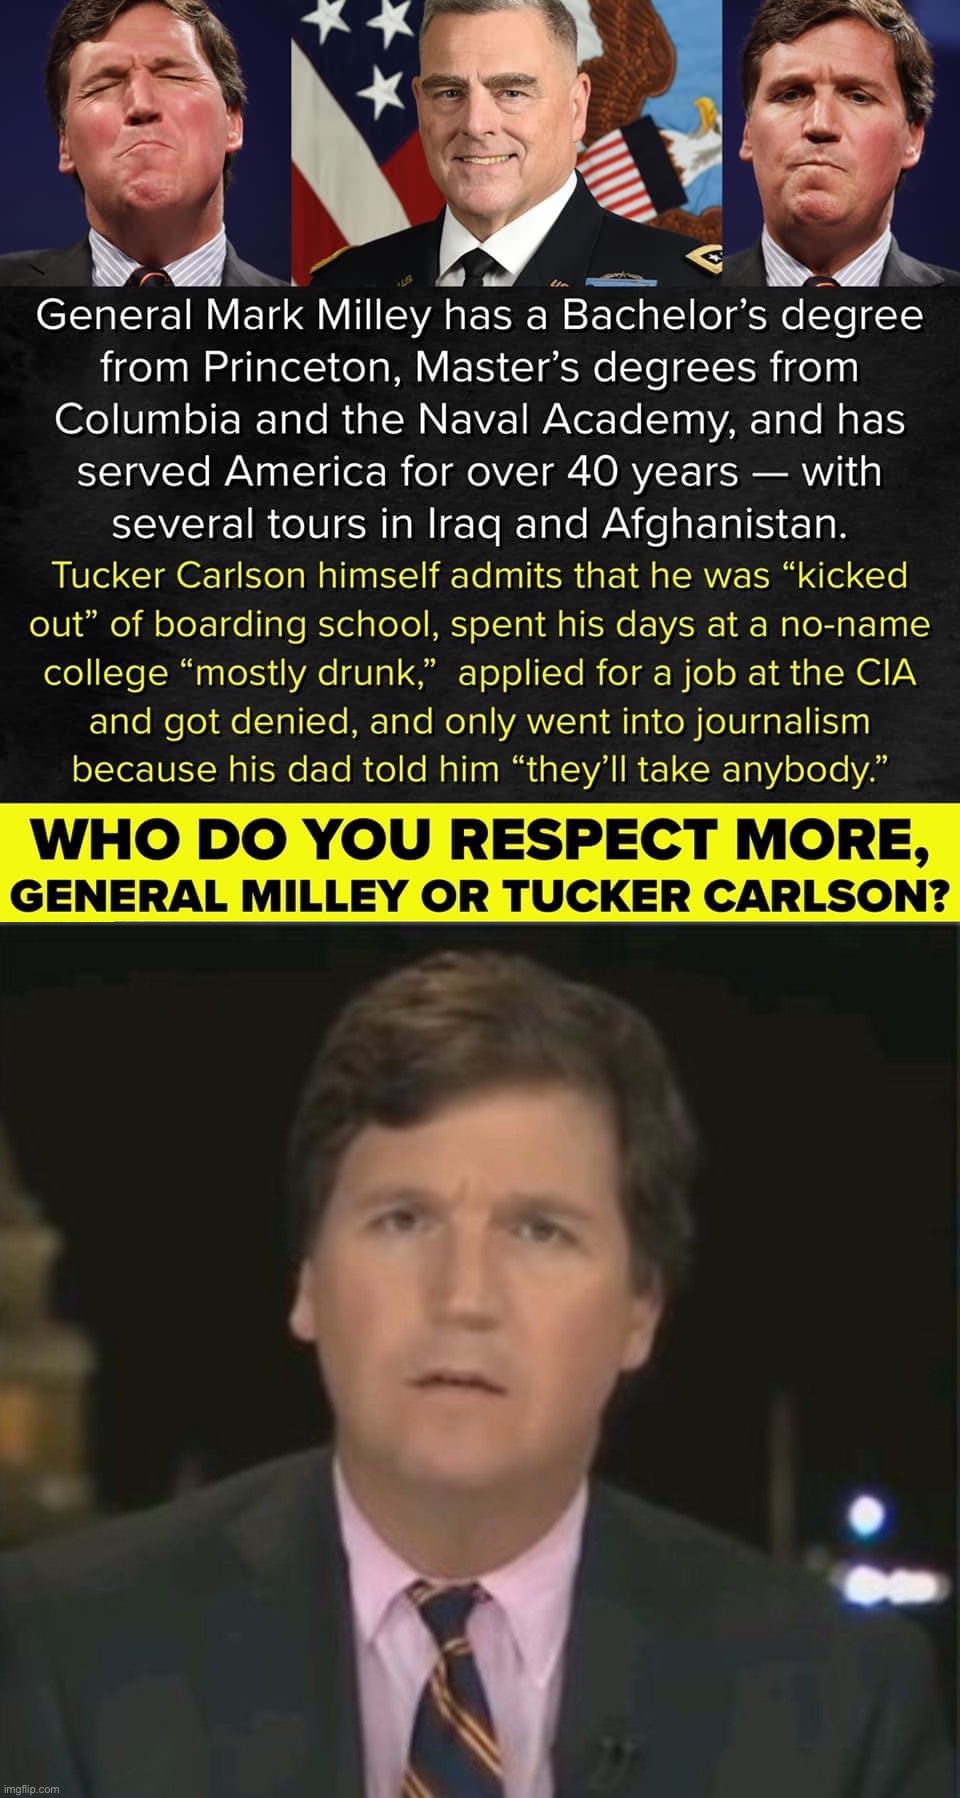 TUCKER CARLSON. Did Maoist Milley build a show from the GROUND UP to reach MILLIONS of viewers? Nah, too busy reading Marx. | image tagged in tucker carlson vs general milley,tucker carlson,media,leftist,marxism,cultural marxism | made w/ Imgflip meme maker